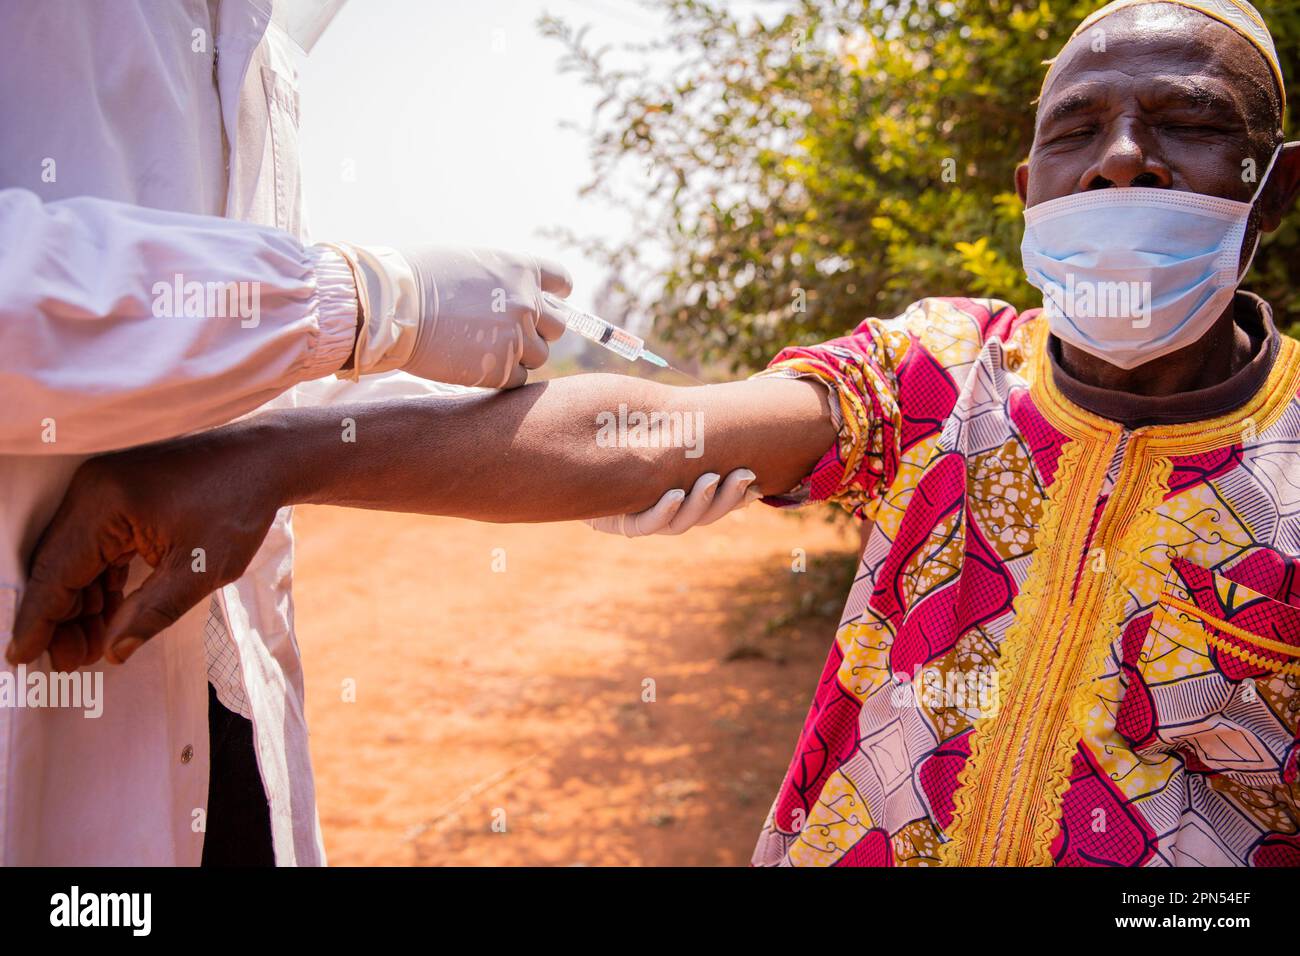 An African doctor vaccinates an elderly man with a syringe on his arm. Stock Photo